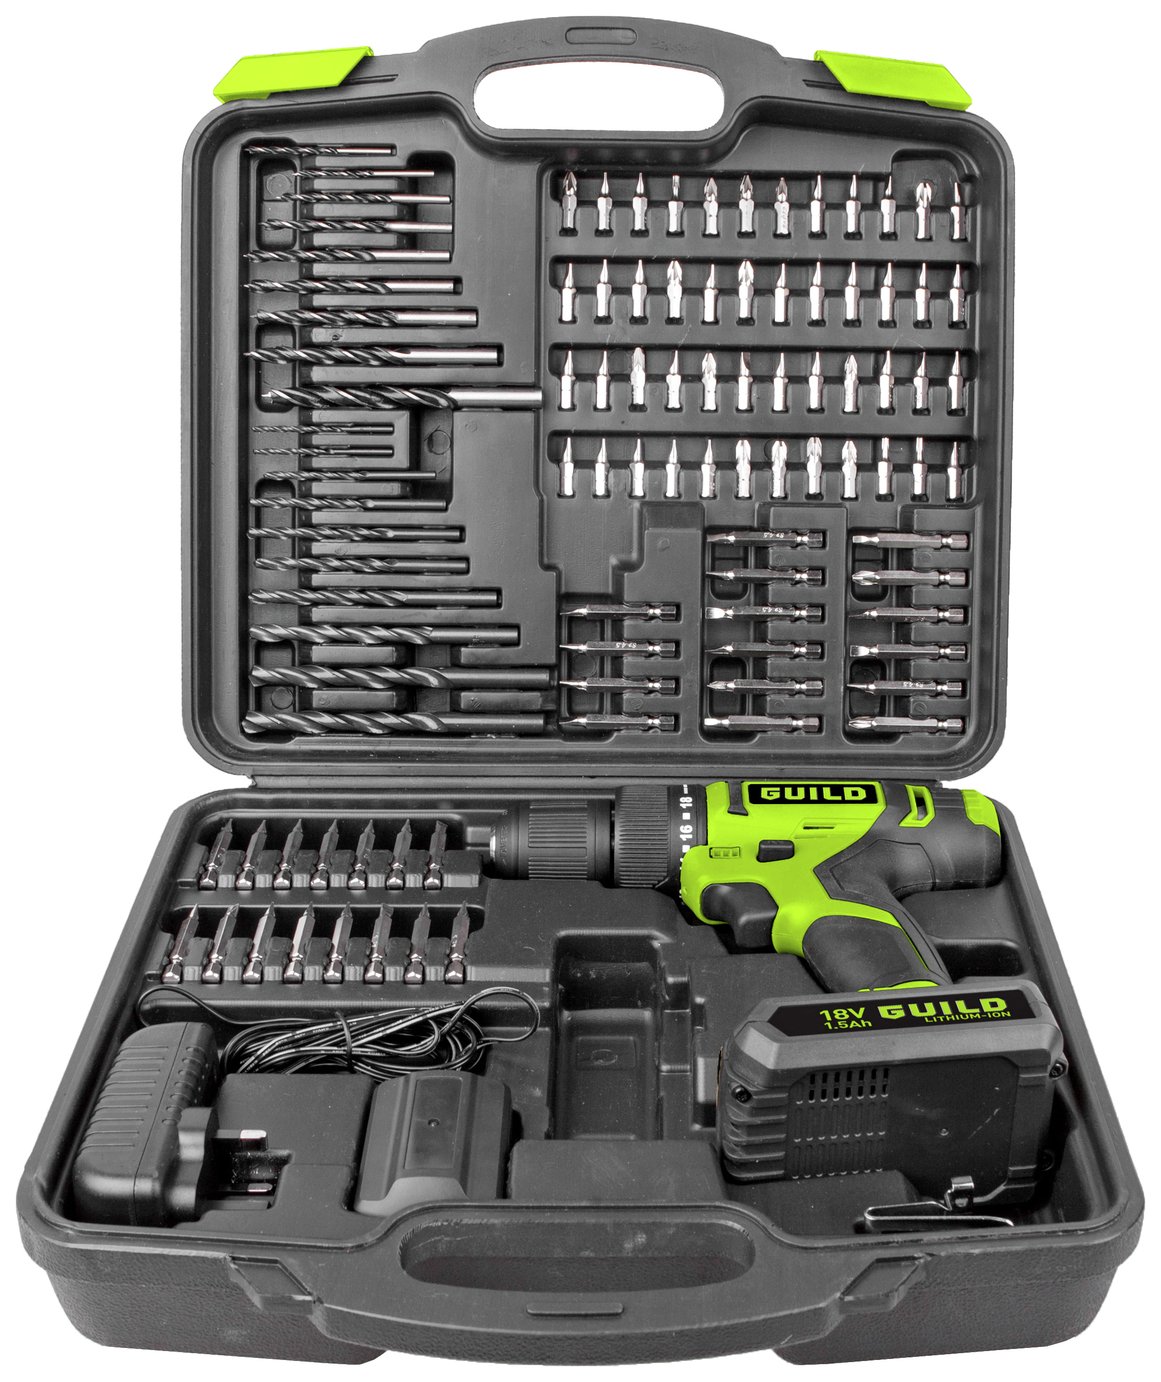 Guild 1.5Ah Cordless Combi Drill with 100 Accessories Review